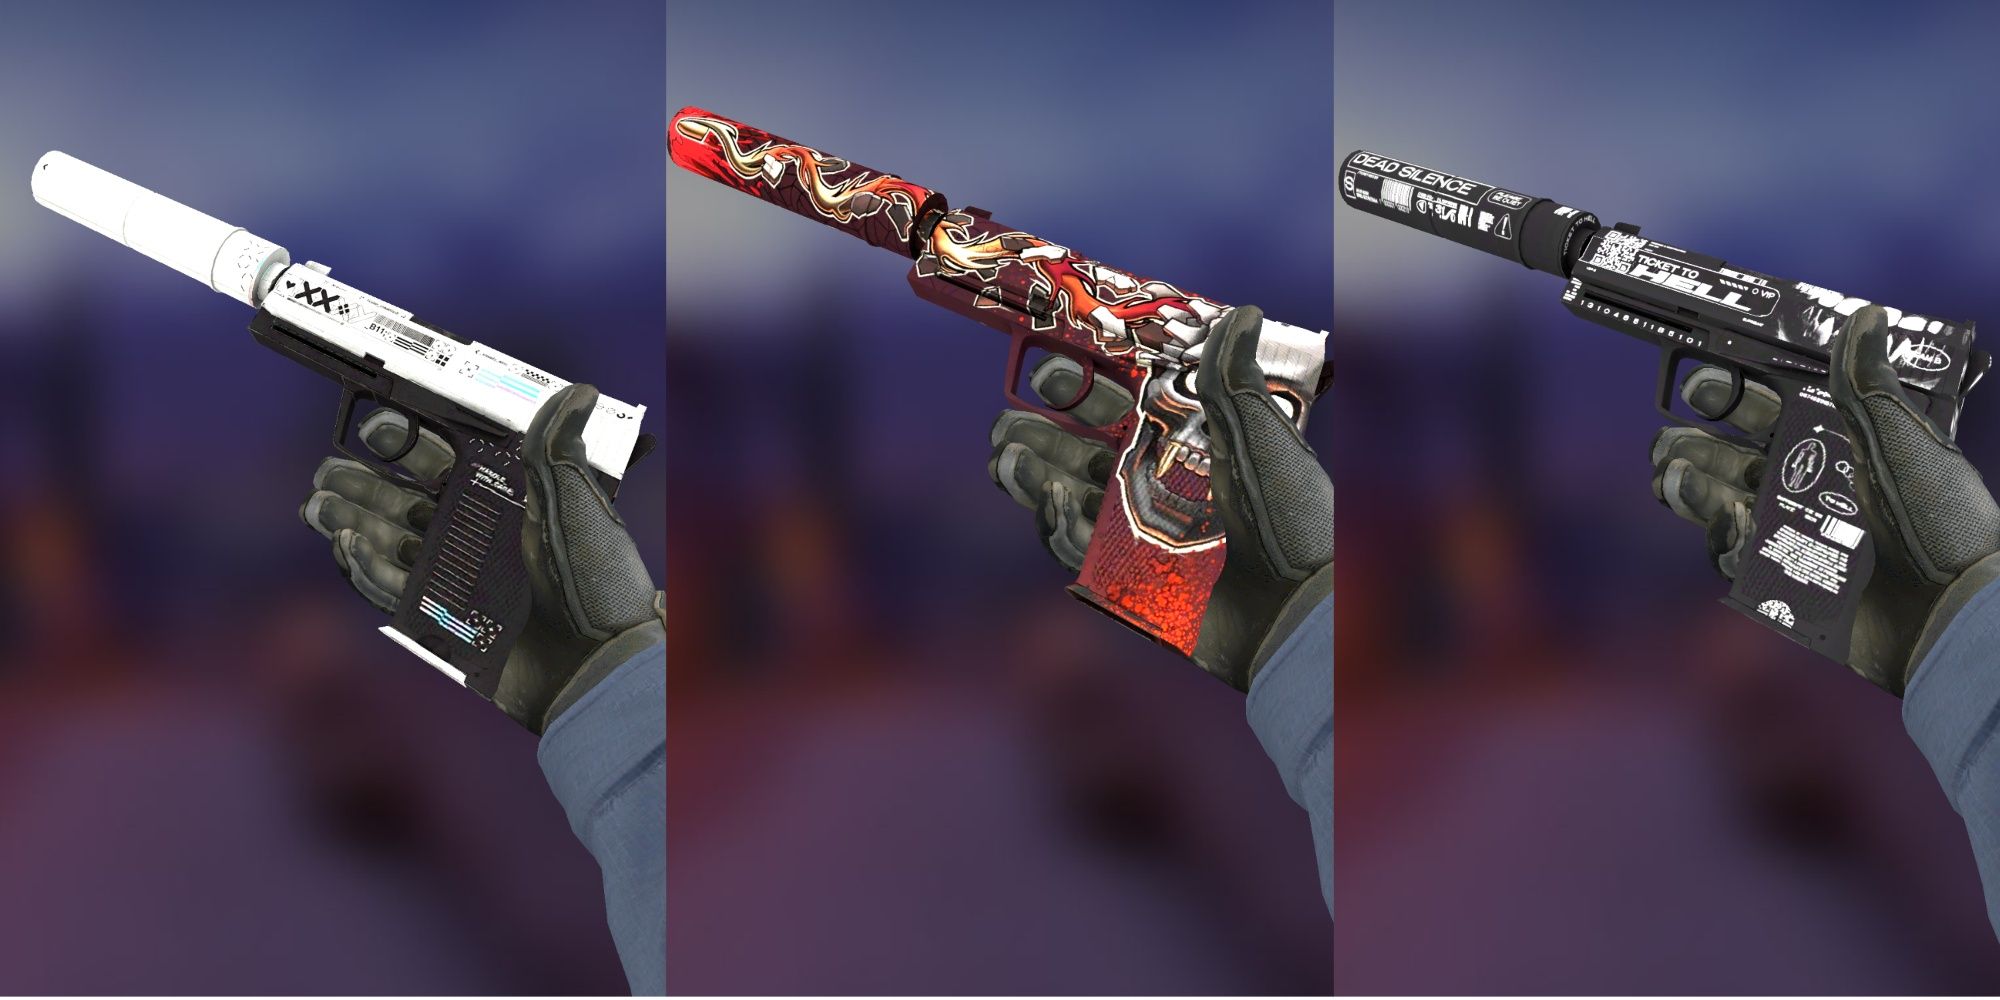 Collage Image showing The Printstream, Kill Confirmed, and Ticket to Hell skins in Counter Strike: Global Offensive.